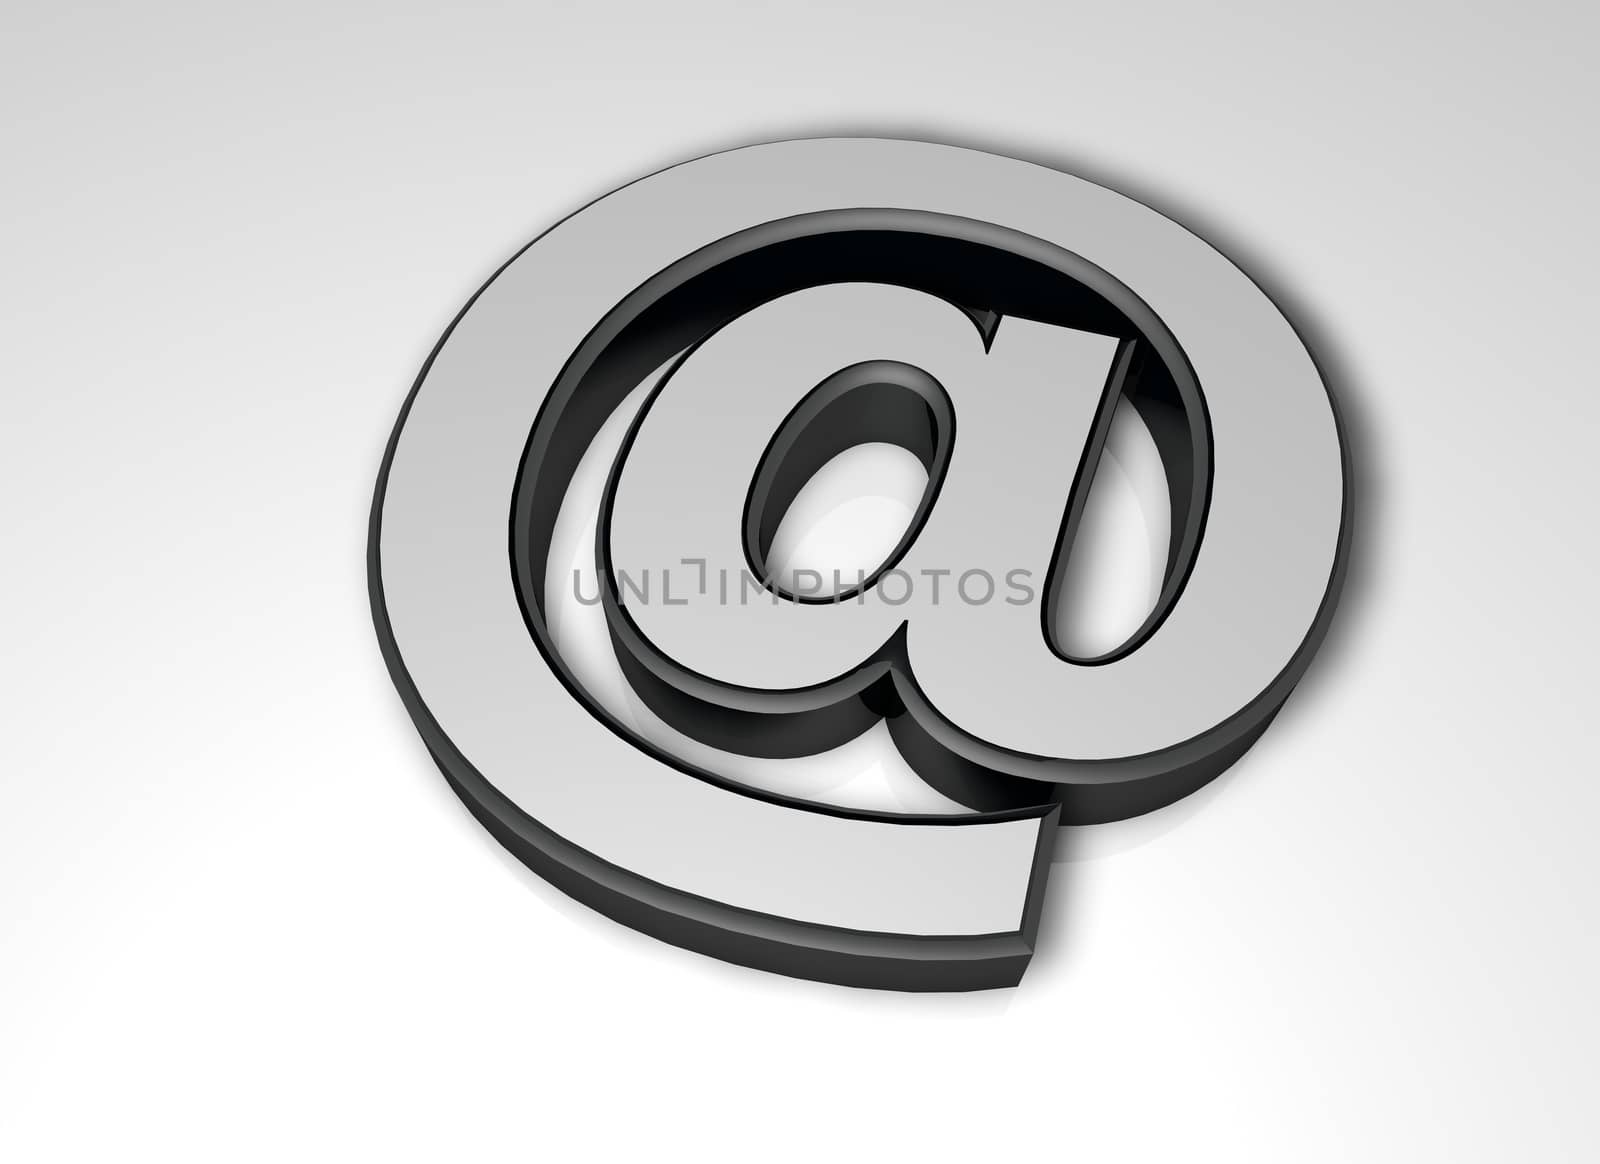 E mail concept on white background by xizang